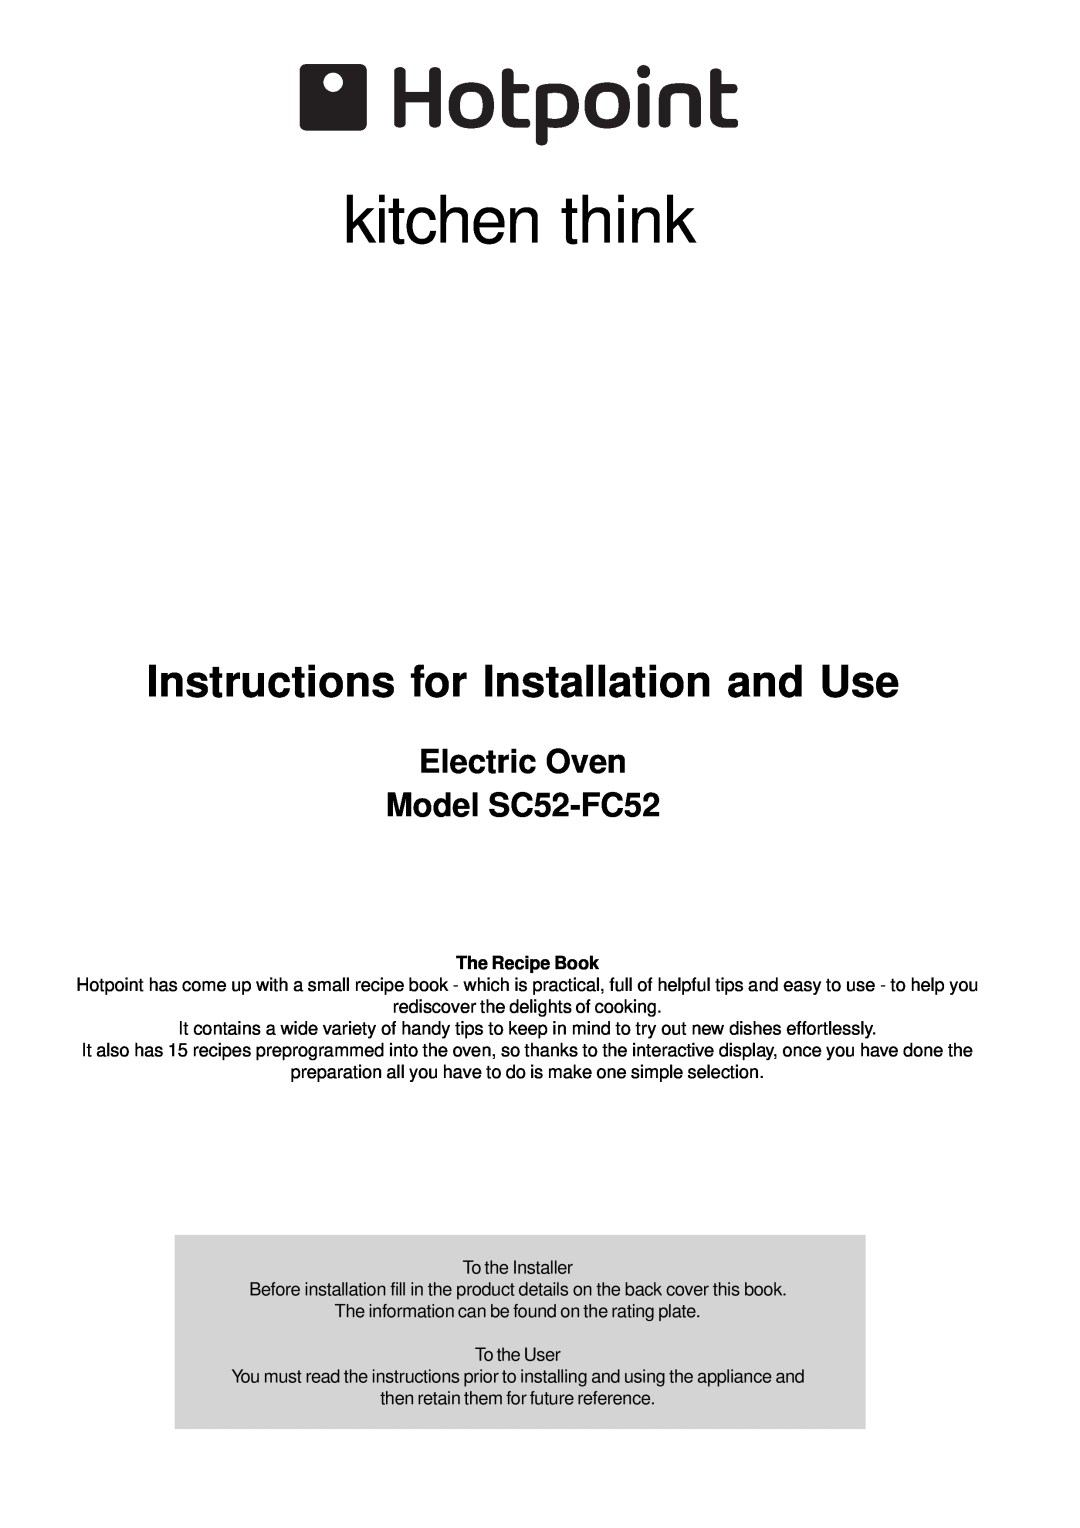 Hotpoint manual Electric Oven Model SC52-FC52, kitchen think, Instructions for Installation and Use 